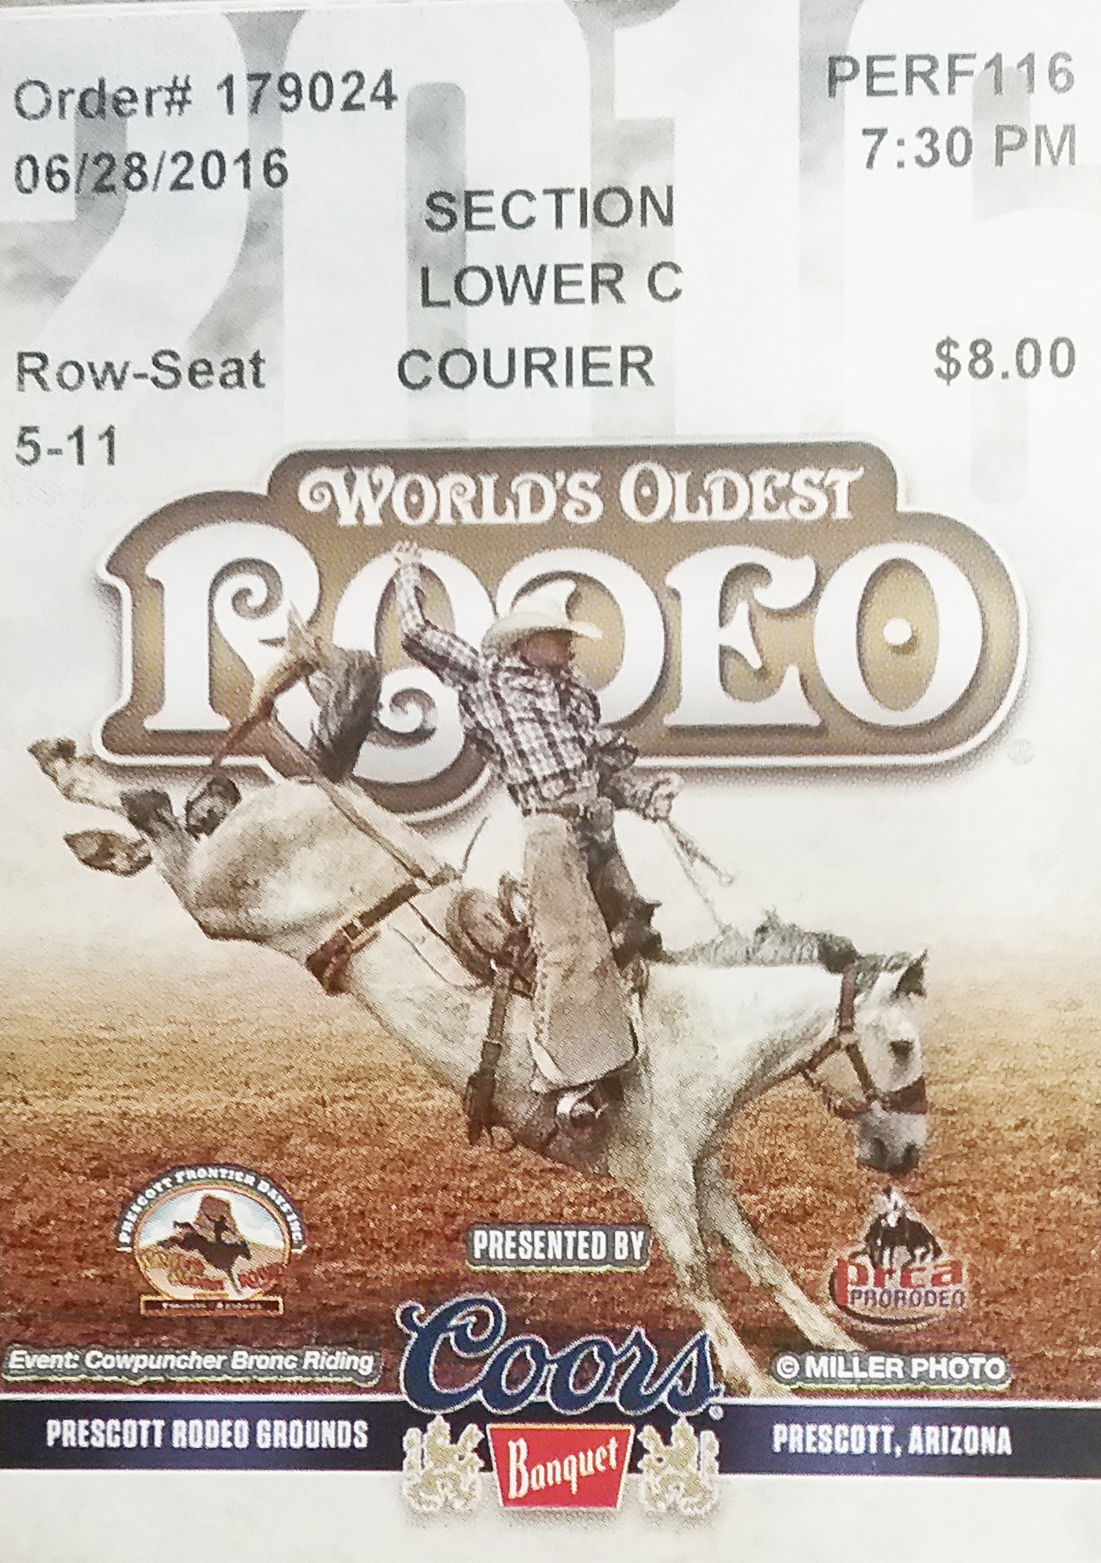 Attention all cowboys and cowgirls rodeo tickets available! The